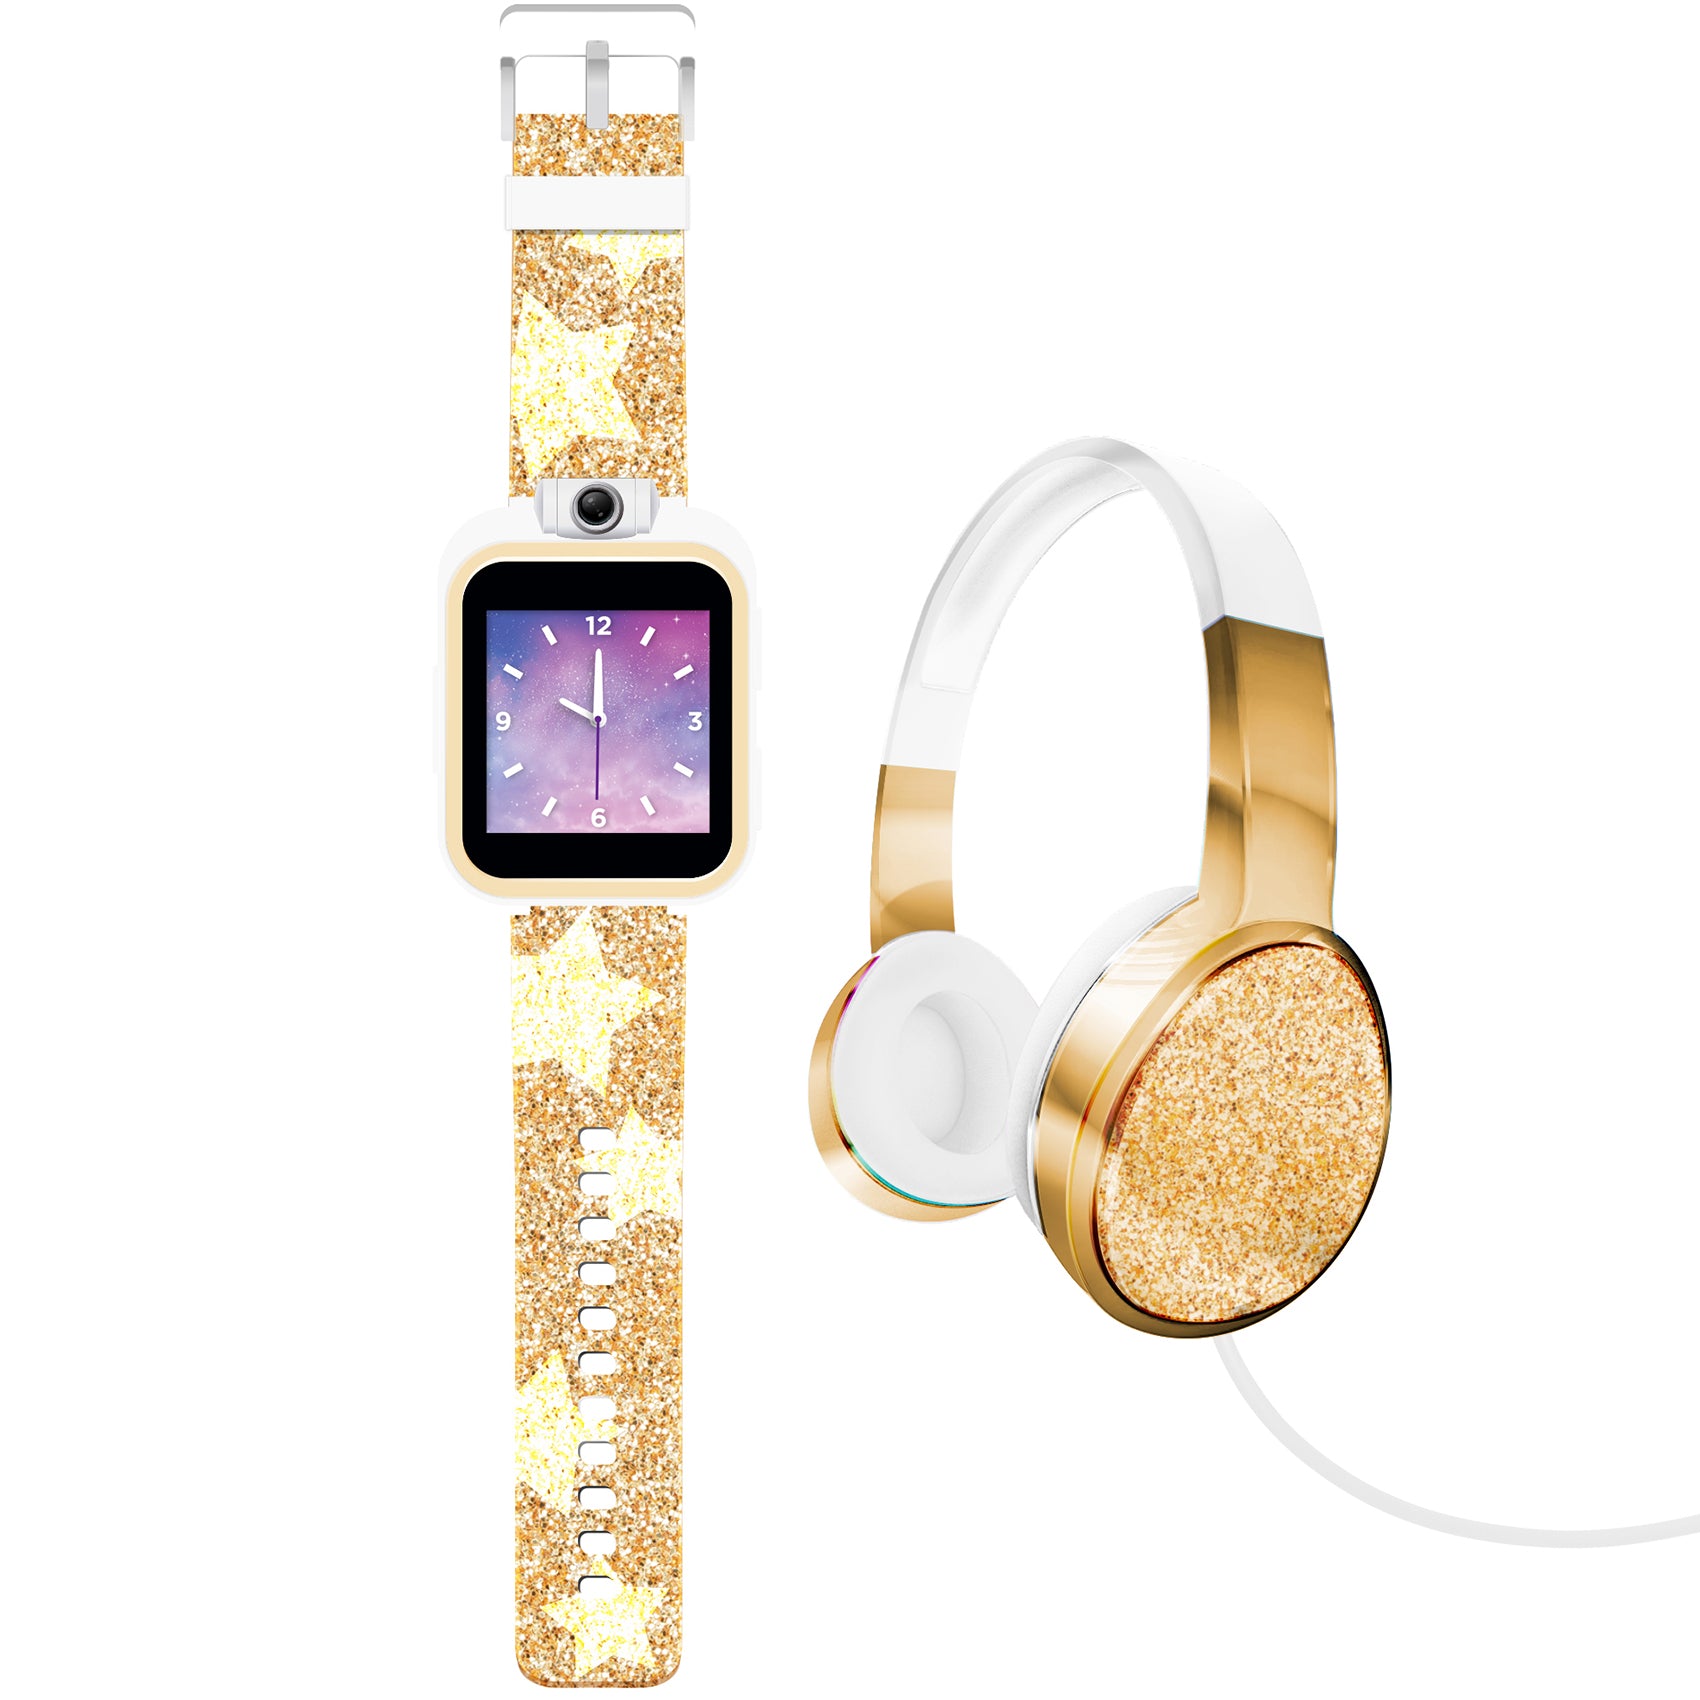 PlayZoom 2 Kids Smartwatch with Headphones: Gold Star Print affordable smart watch with headphones